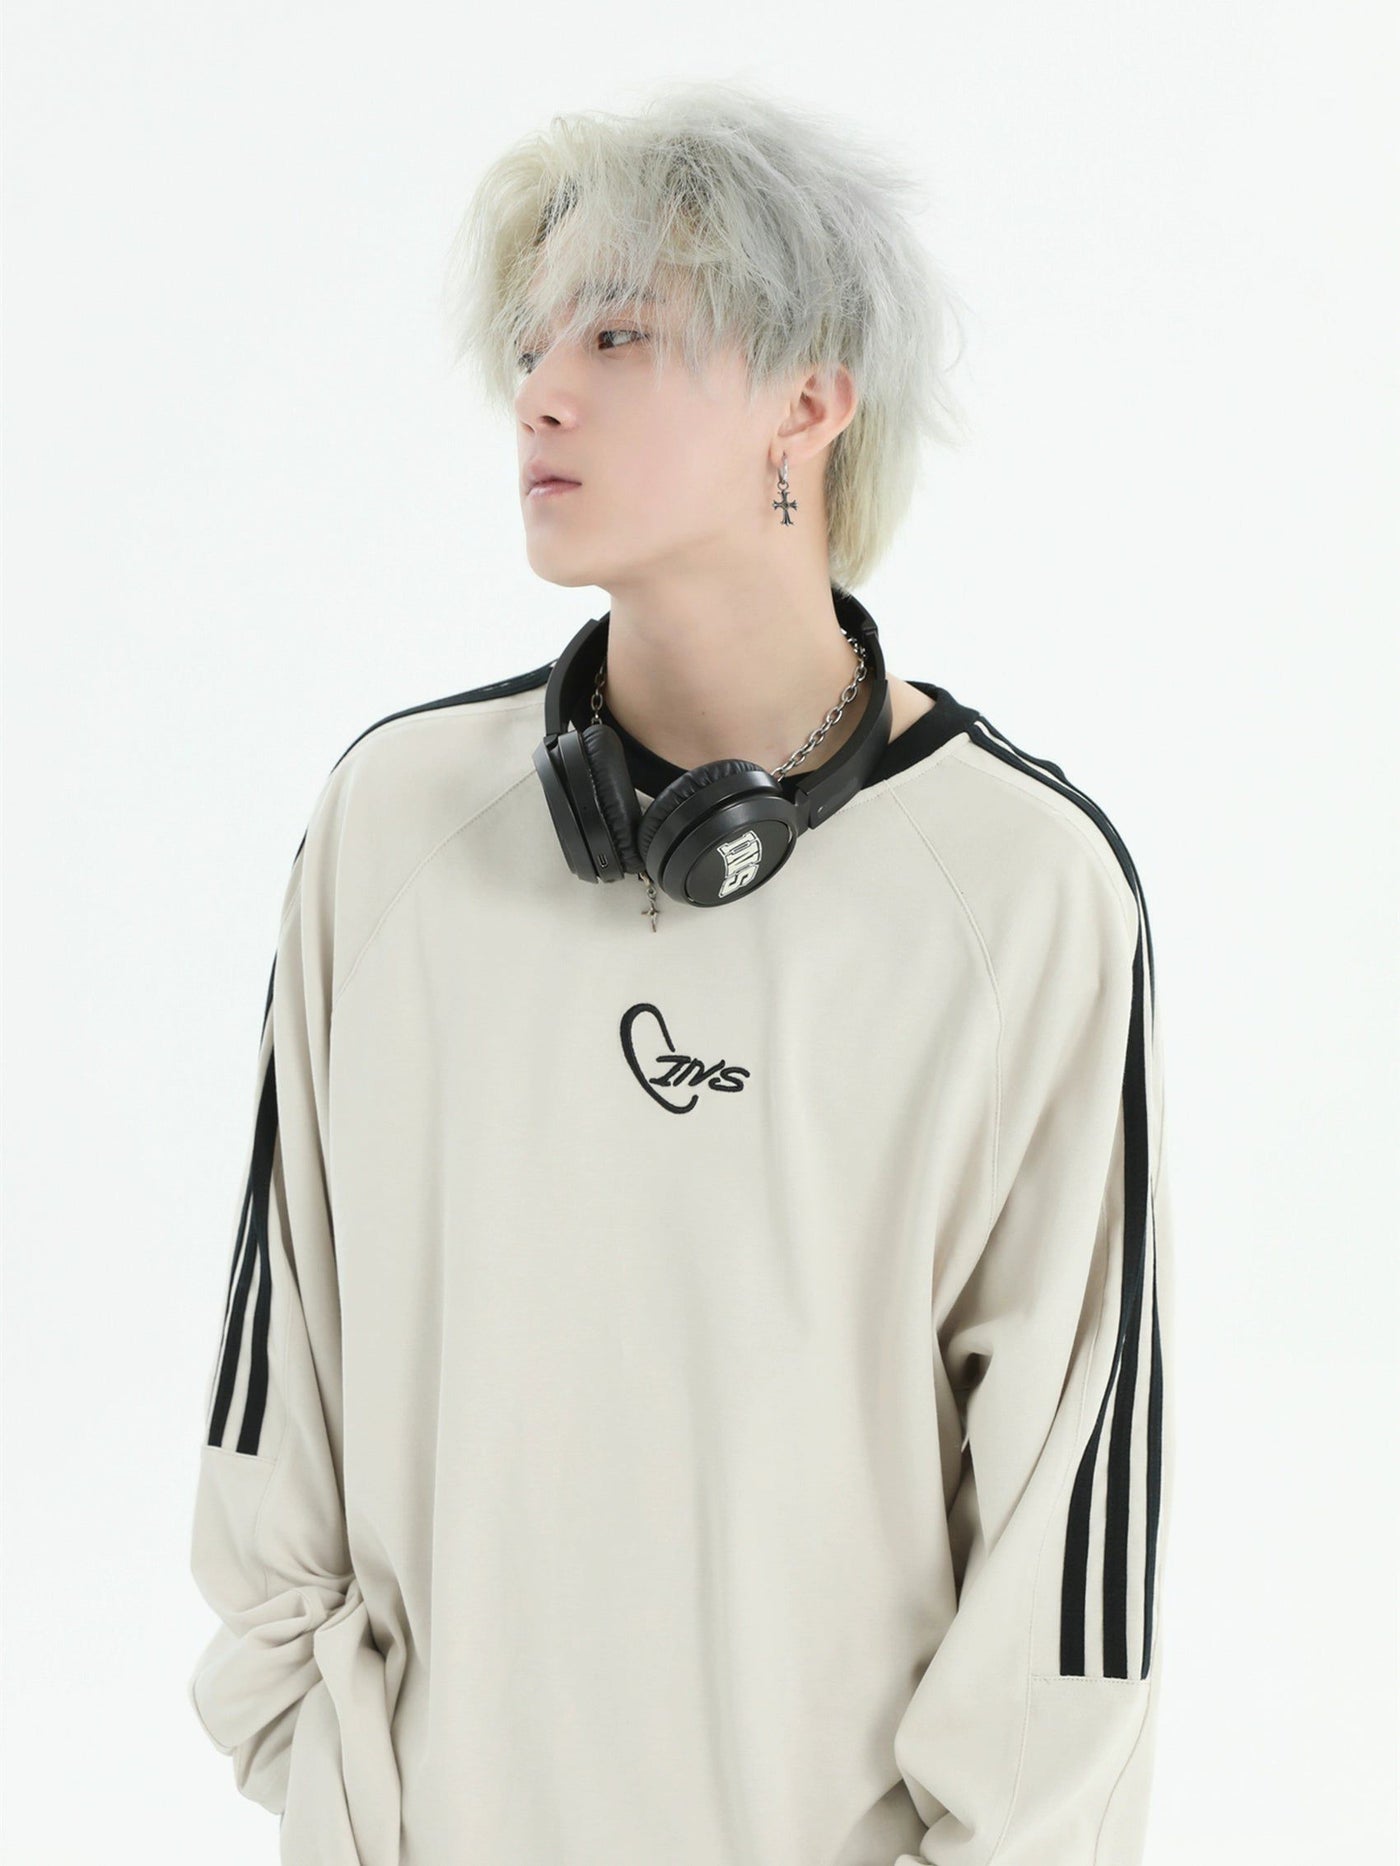 Stripes Embroidered Logo Long Sleeve T-Shirt Korean Street Fashion T-Shirt By INS Korea Shop Online at OH Vault